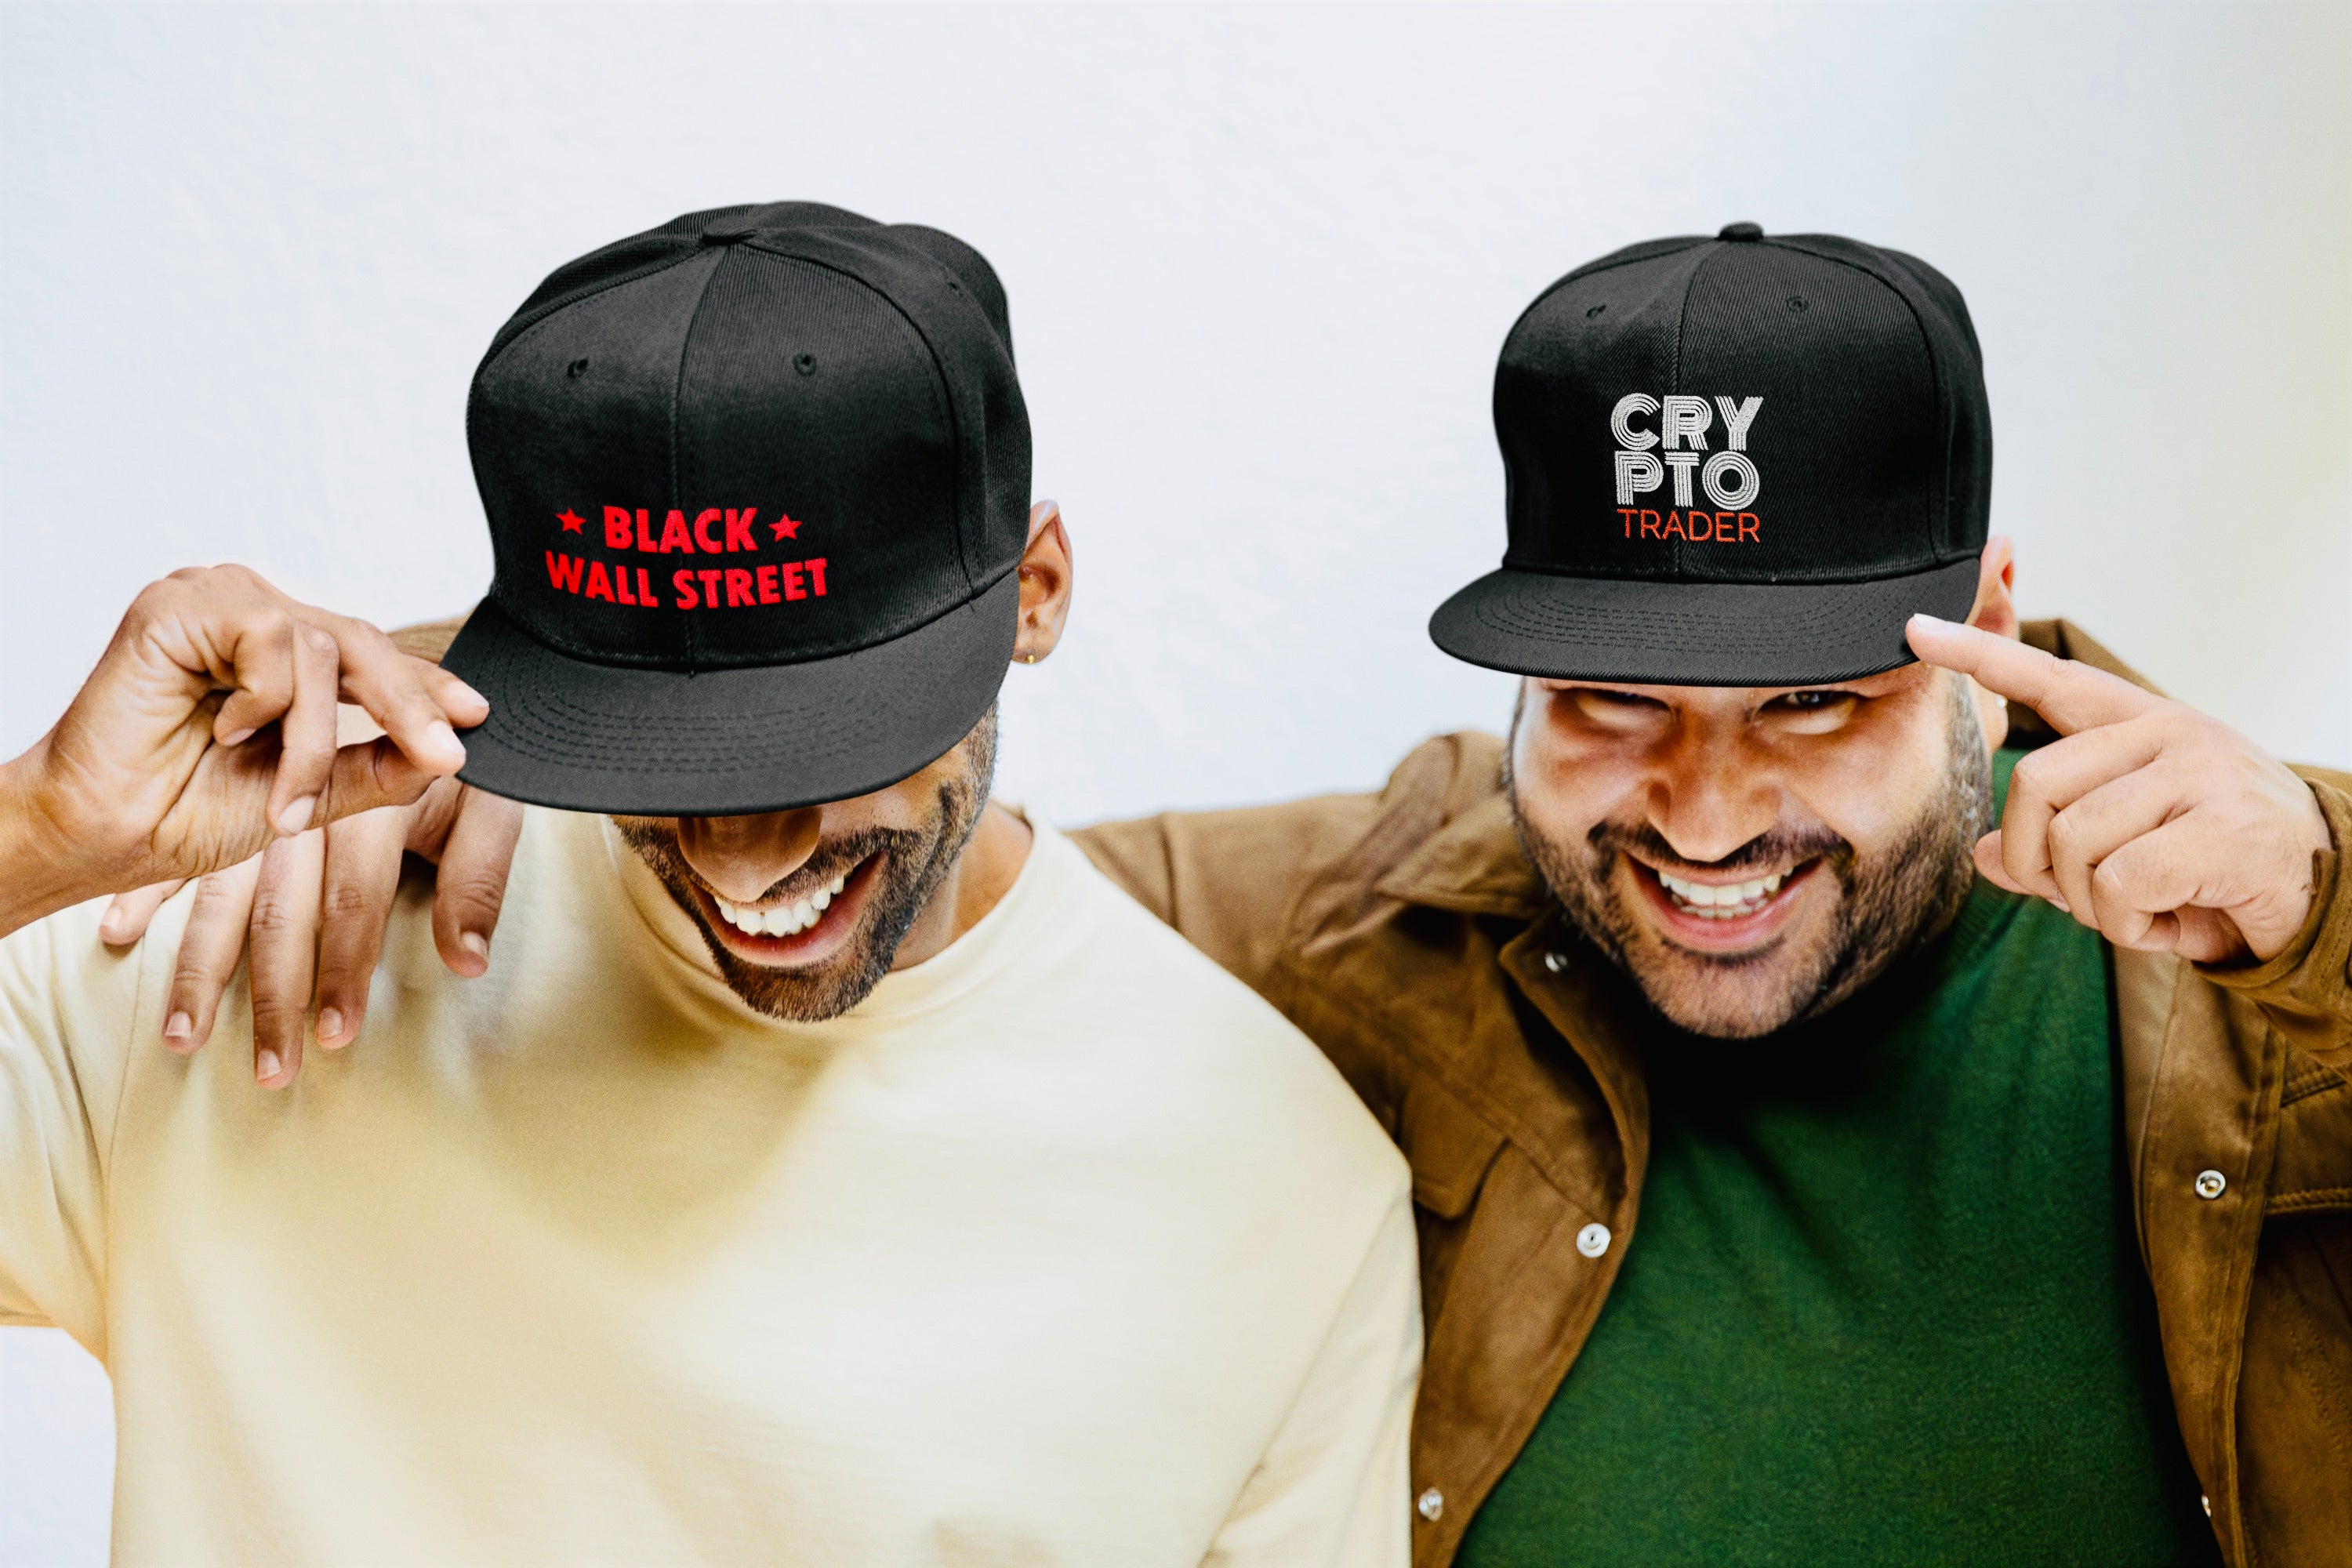 Hats | Caps - InvestmenTees